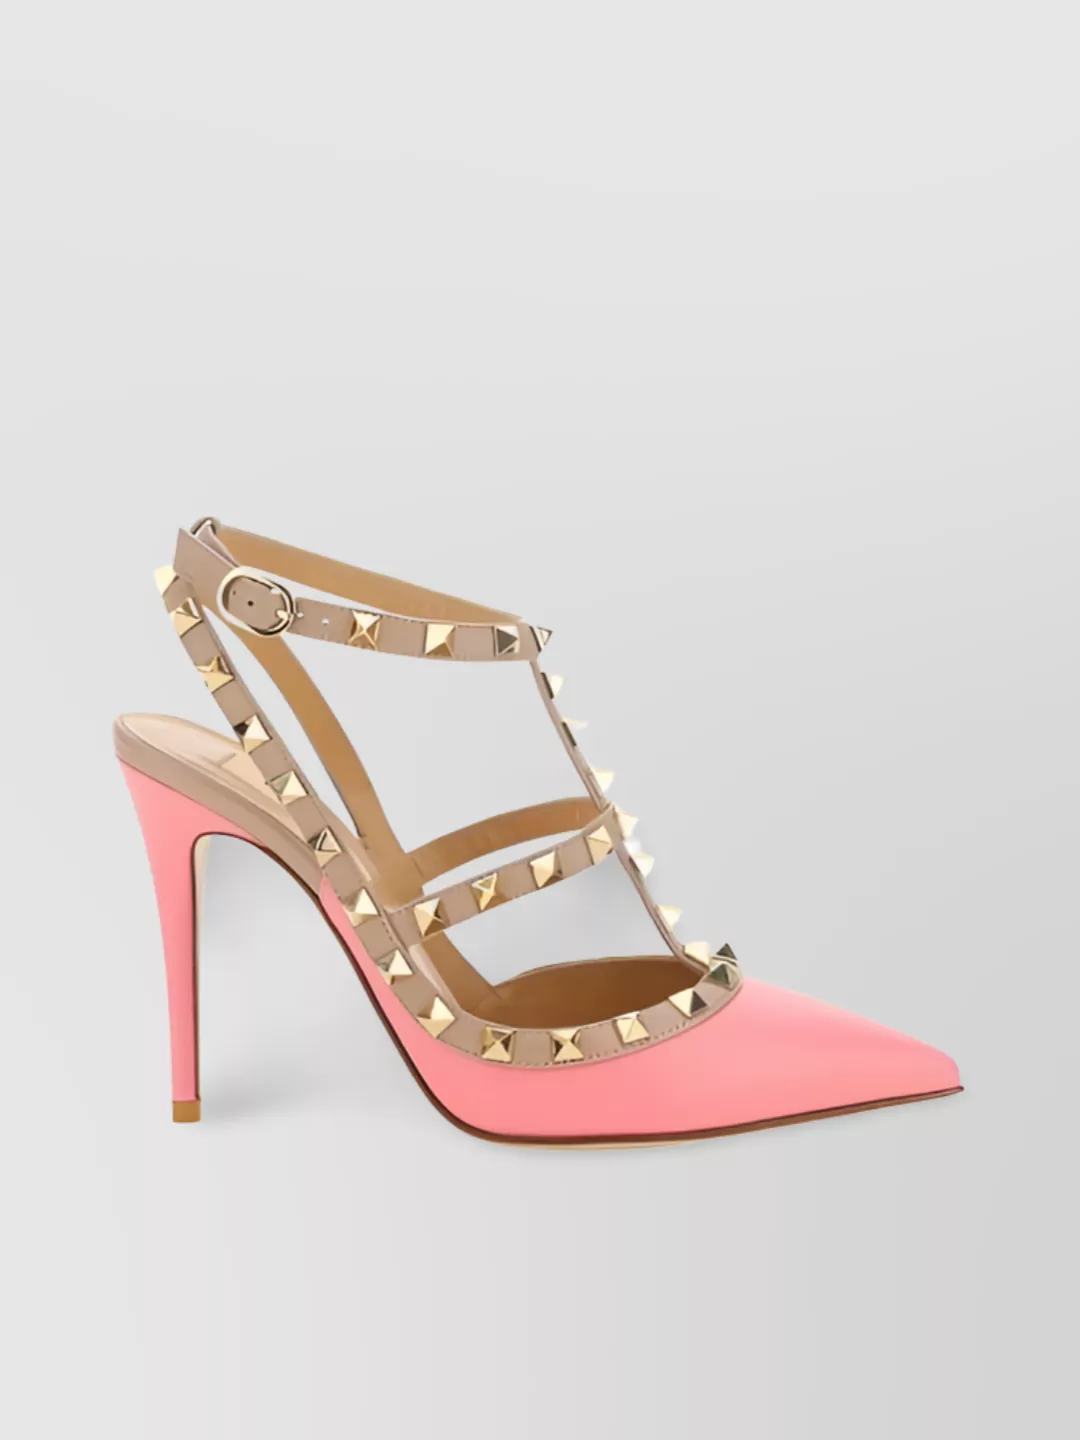 Shop Valentino Pointed Toe Stiletto Sandals With Strappy Design And Stud Embellishments In Pink